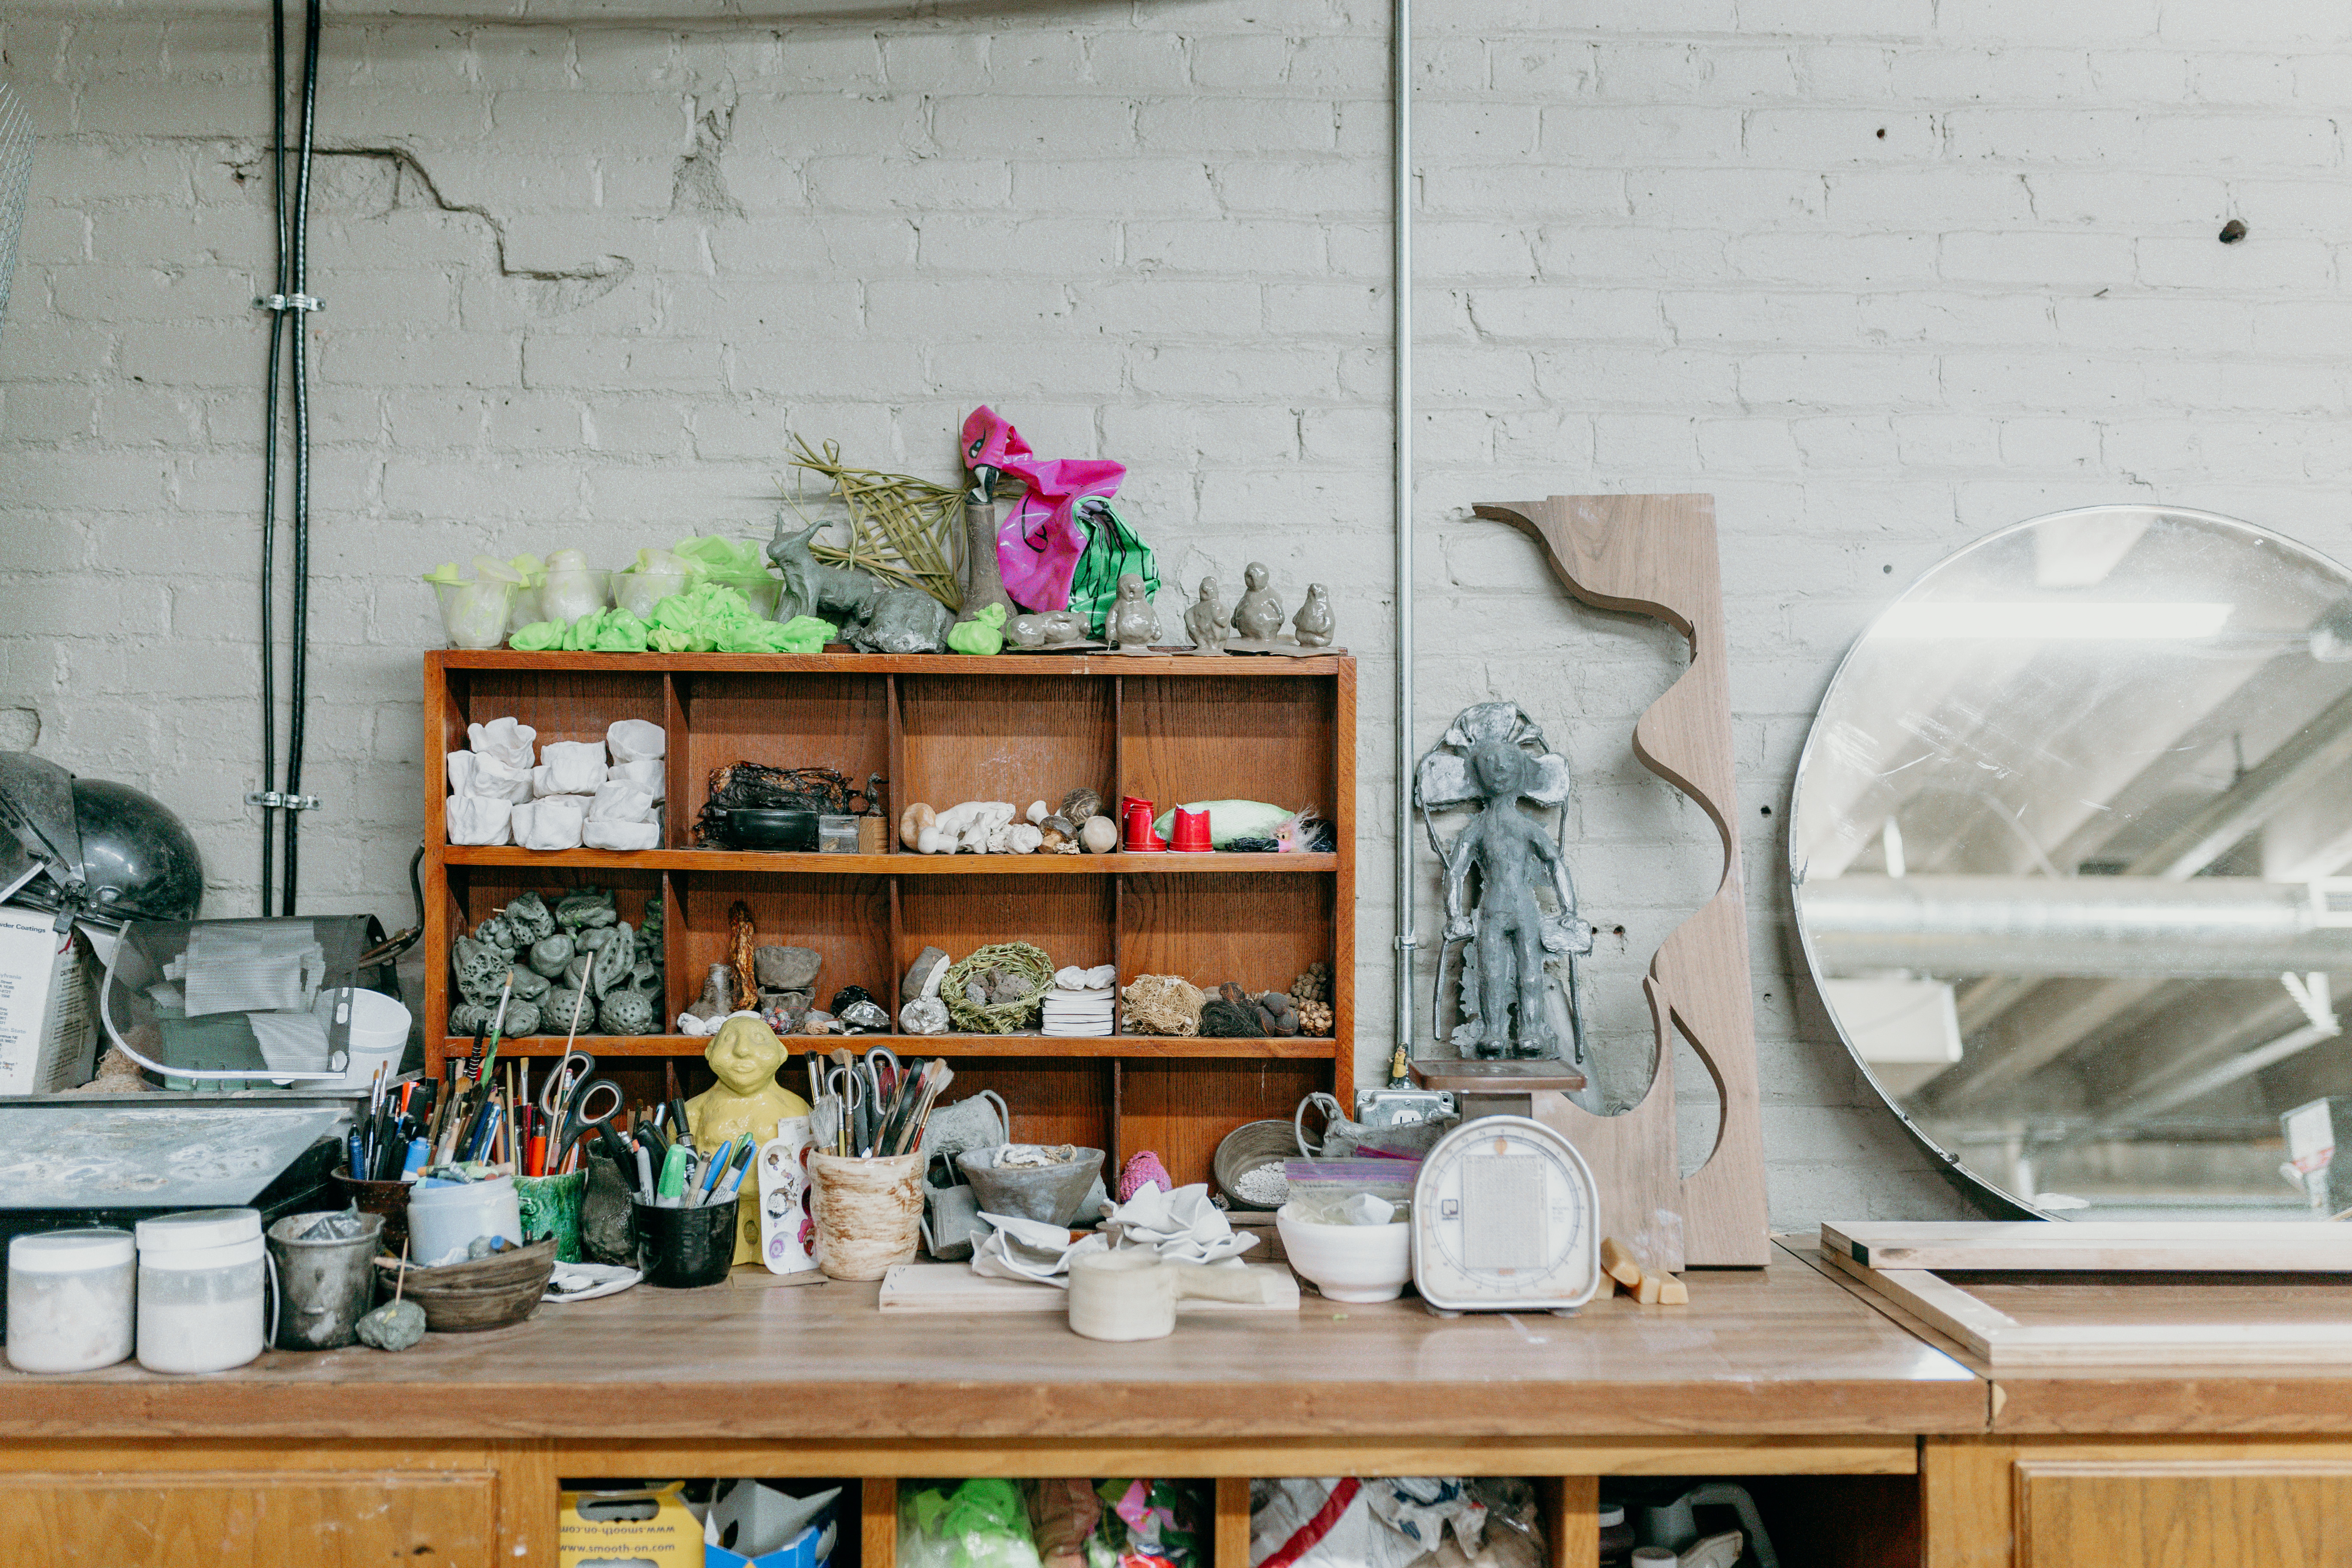 A workspace with several clay sculpting tools and work in progress sculptures. There is a mirror resting against a white painted brick wall. 